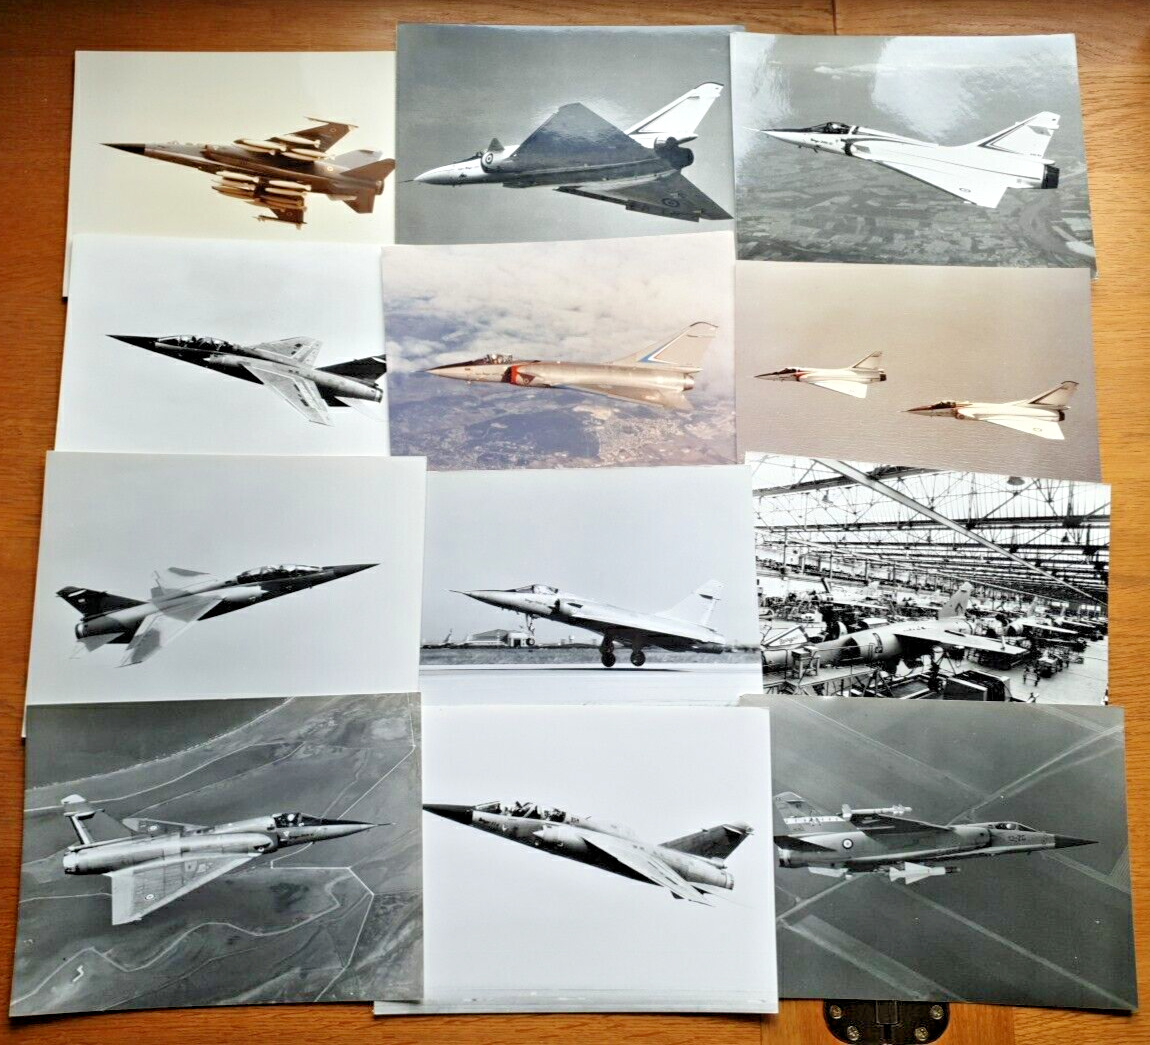 12 x Dassault Mirage photographs - press releases & official media